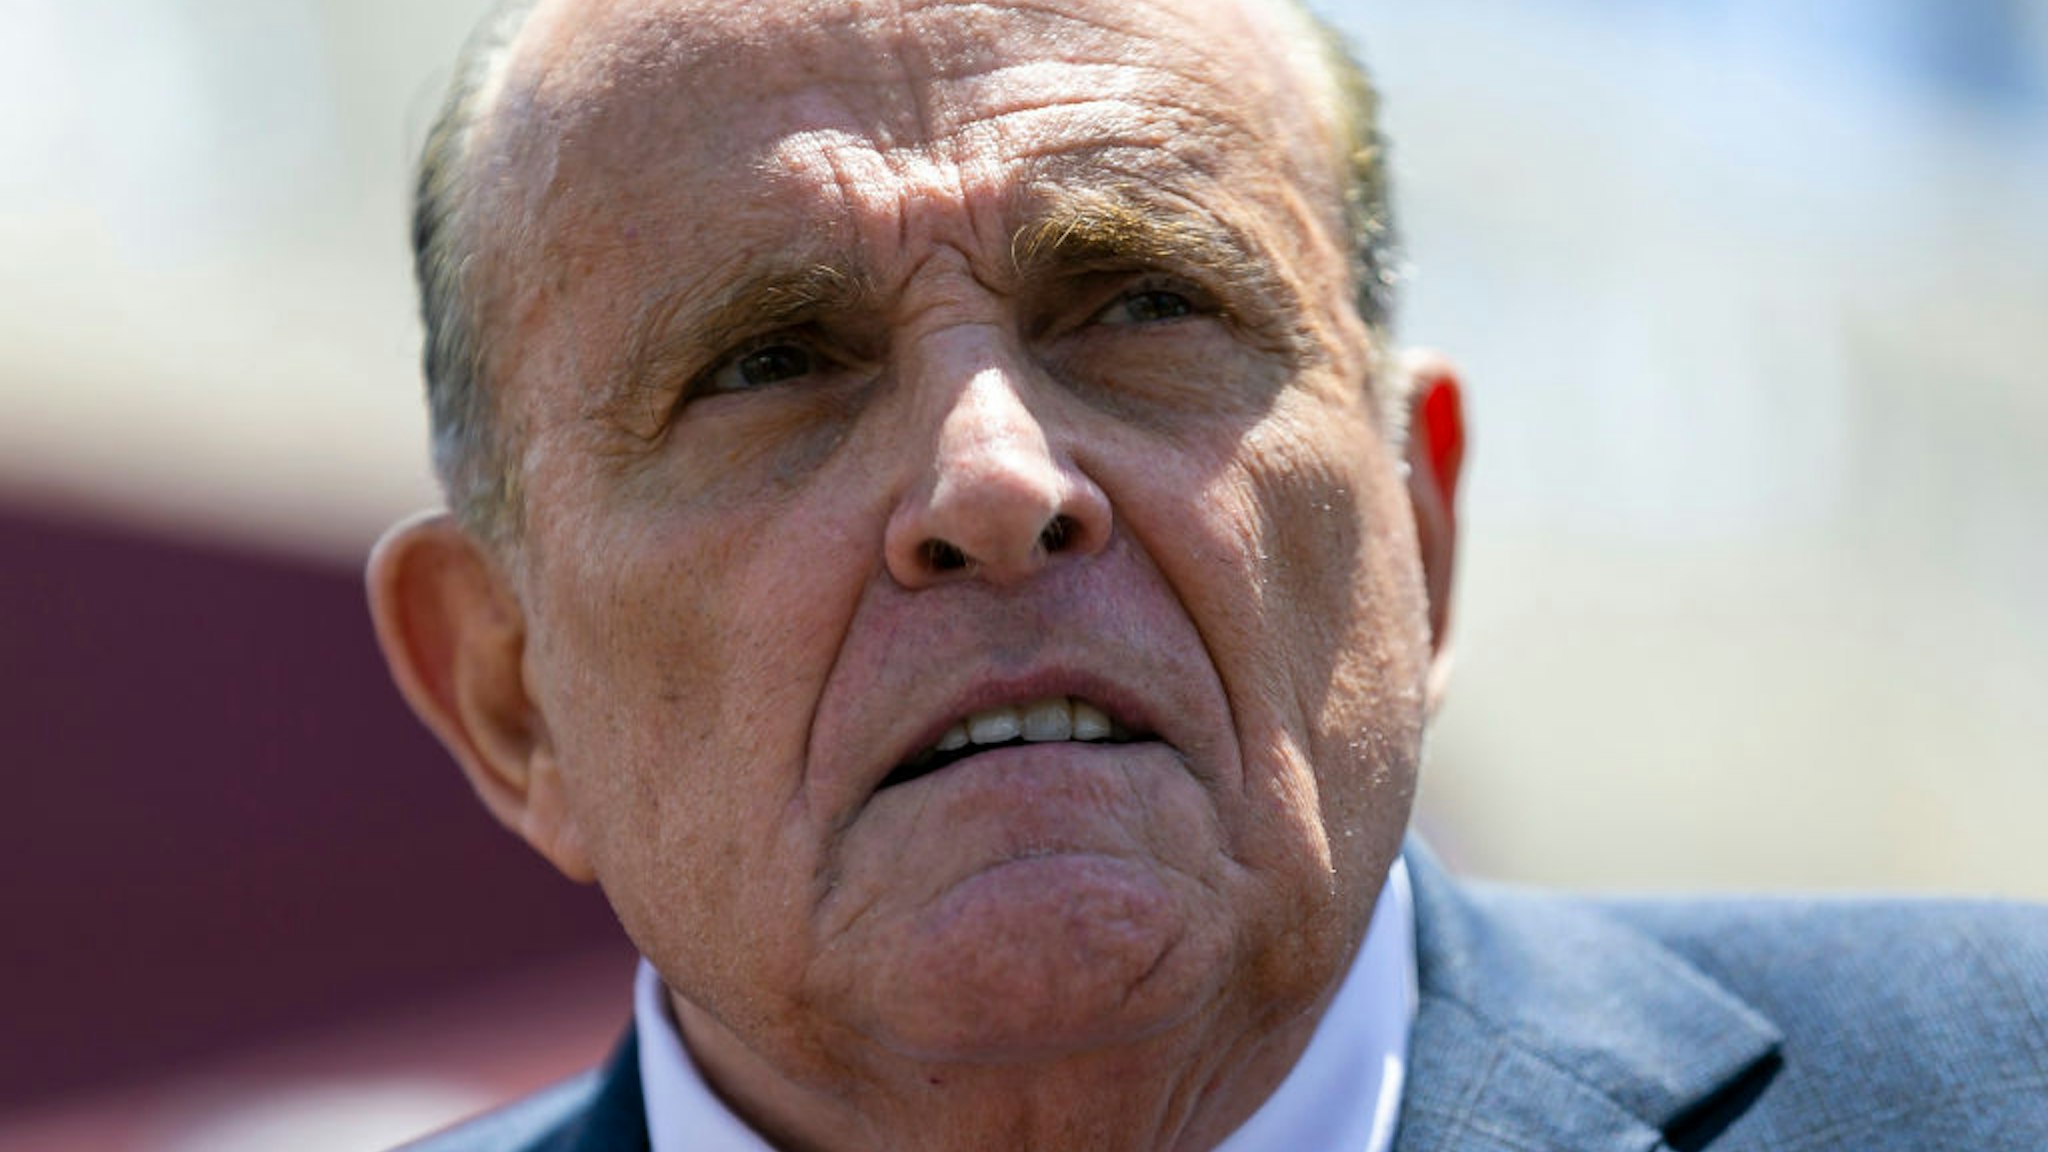 Former New York City Mayor Rudy Giuliani speaks during a news conference in Miami in July 2021. (Matias J. Ocner/Miami Herald/Tribune News Service via Getty Images)